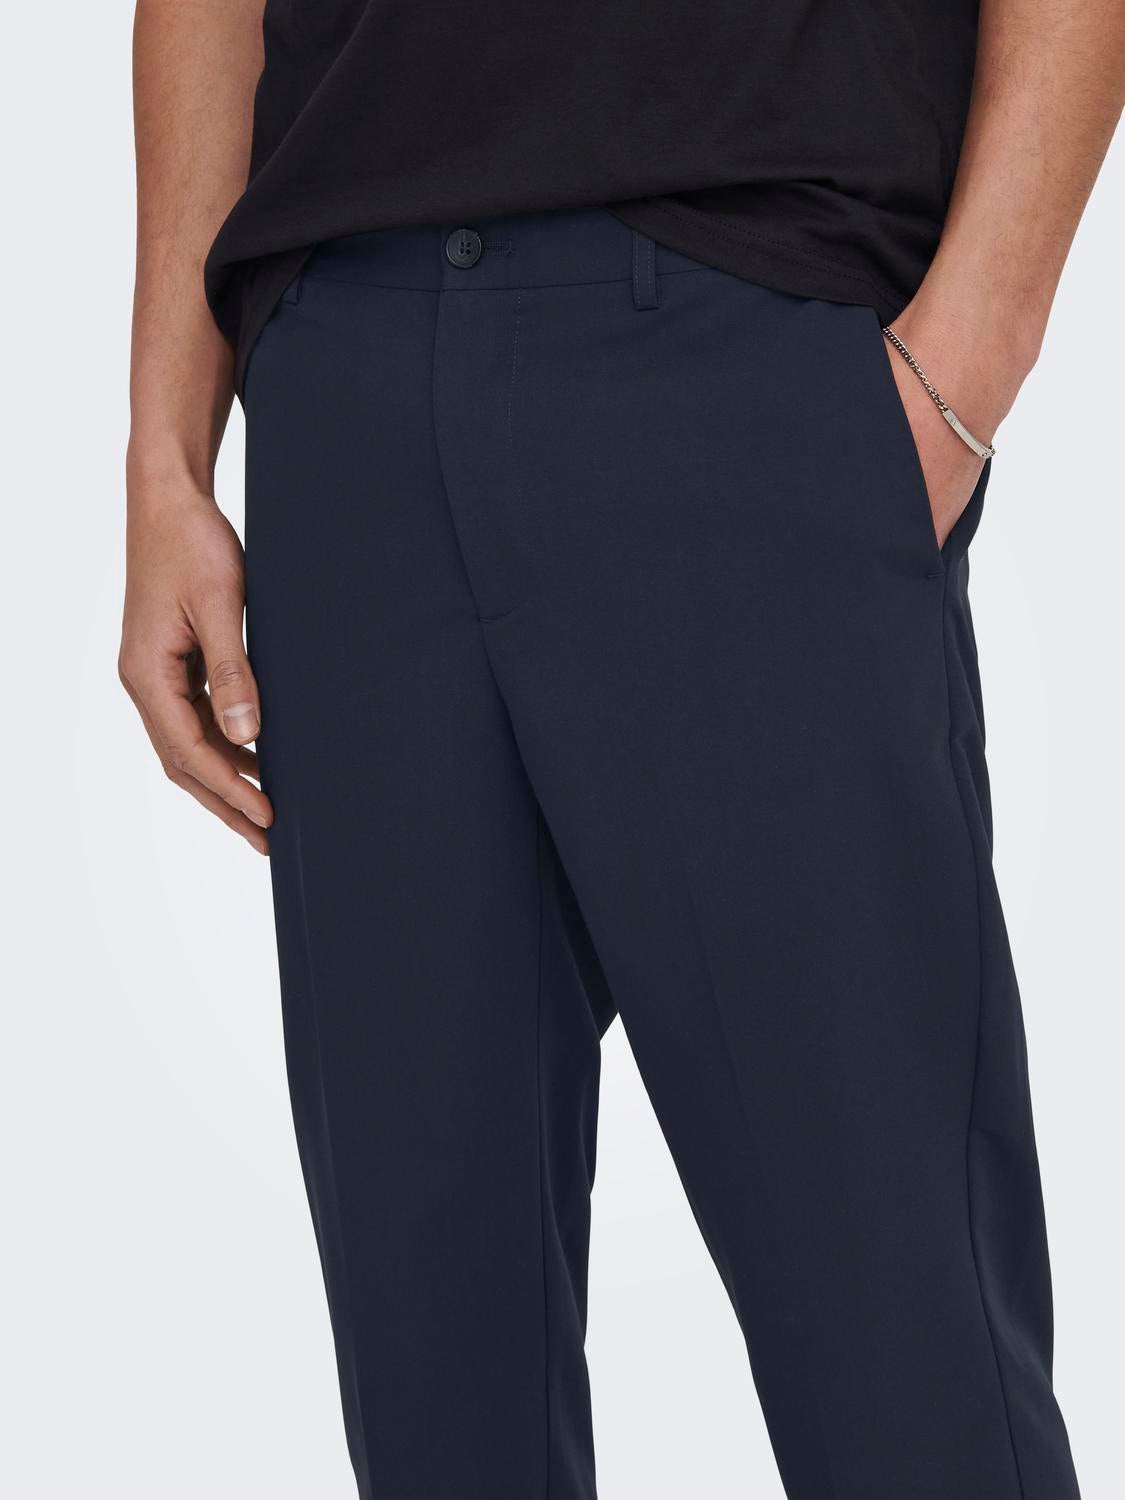 Buy The Pant Project Men Tailored Slim Fit Wrinkle Free Cargos Trousers -  Trousers for Men 21811856 | Myntra